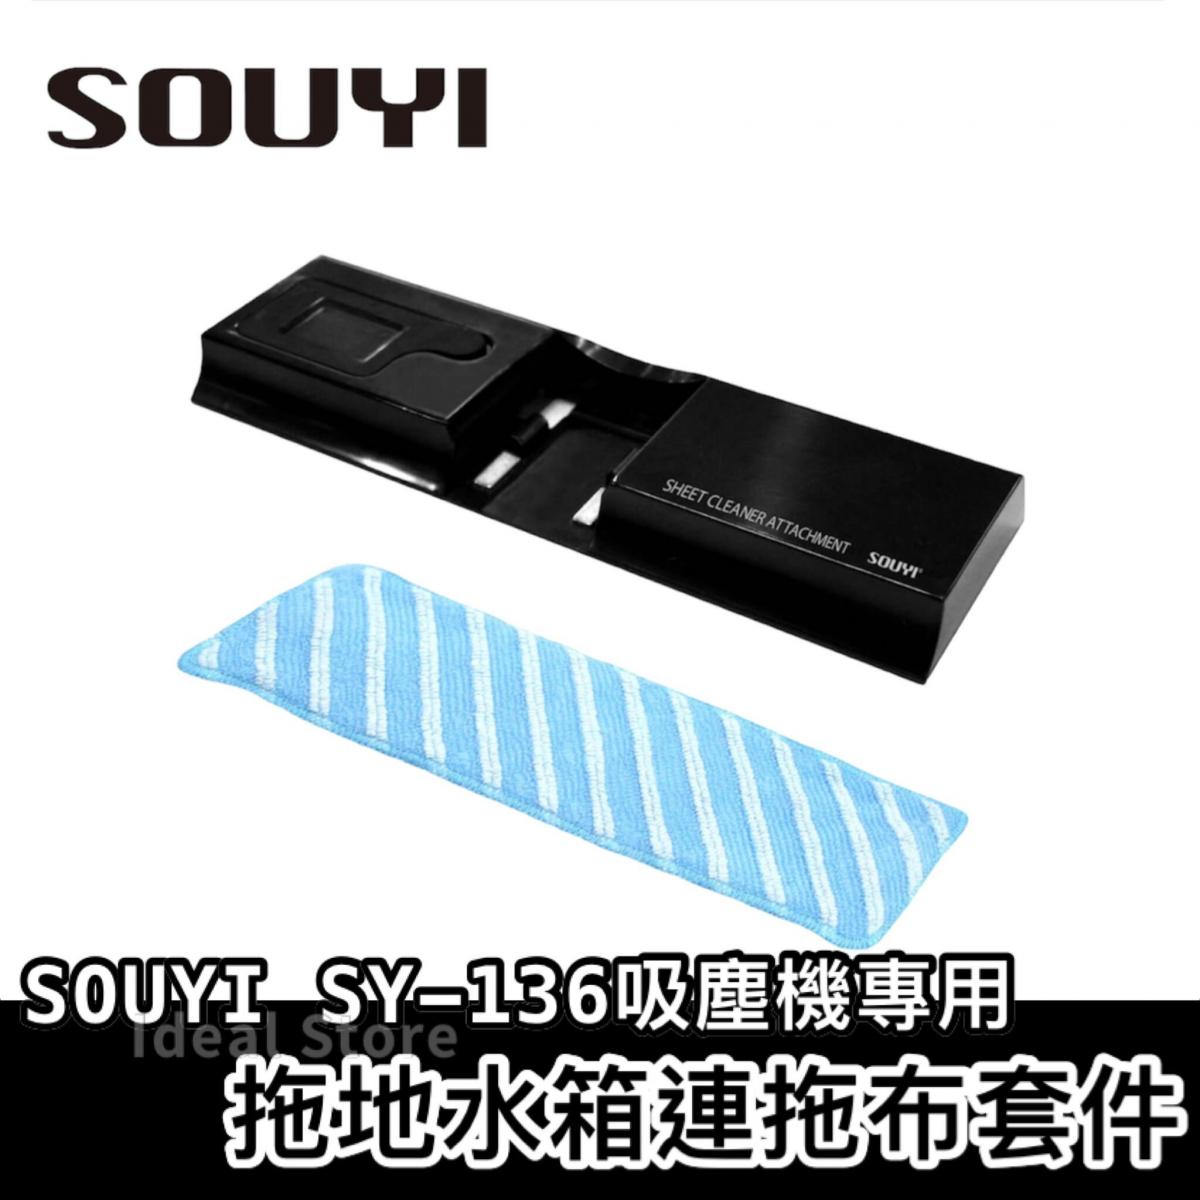 Souyi - Mopping water tank with mop cloth set (mop cloth color random) SY-136 dedicated for suction and mopping dual-purpose wireless vacuum cleaner | Vacuum cleaner accessories | Floor mop